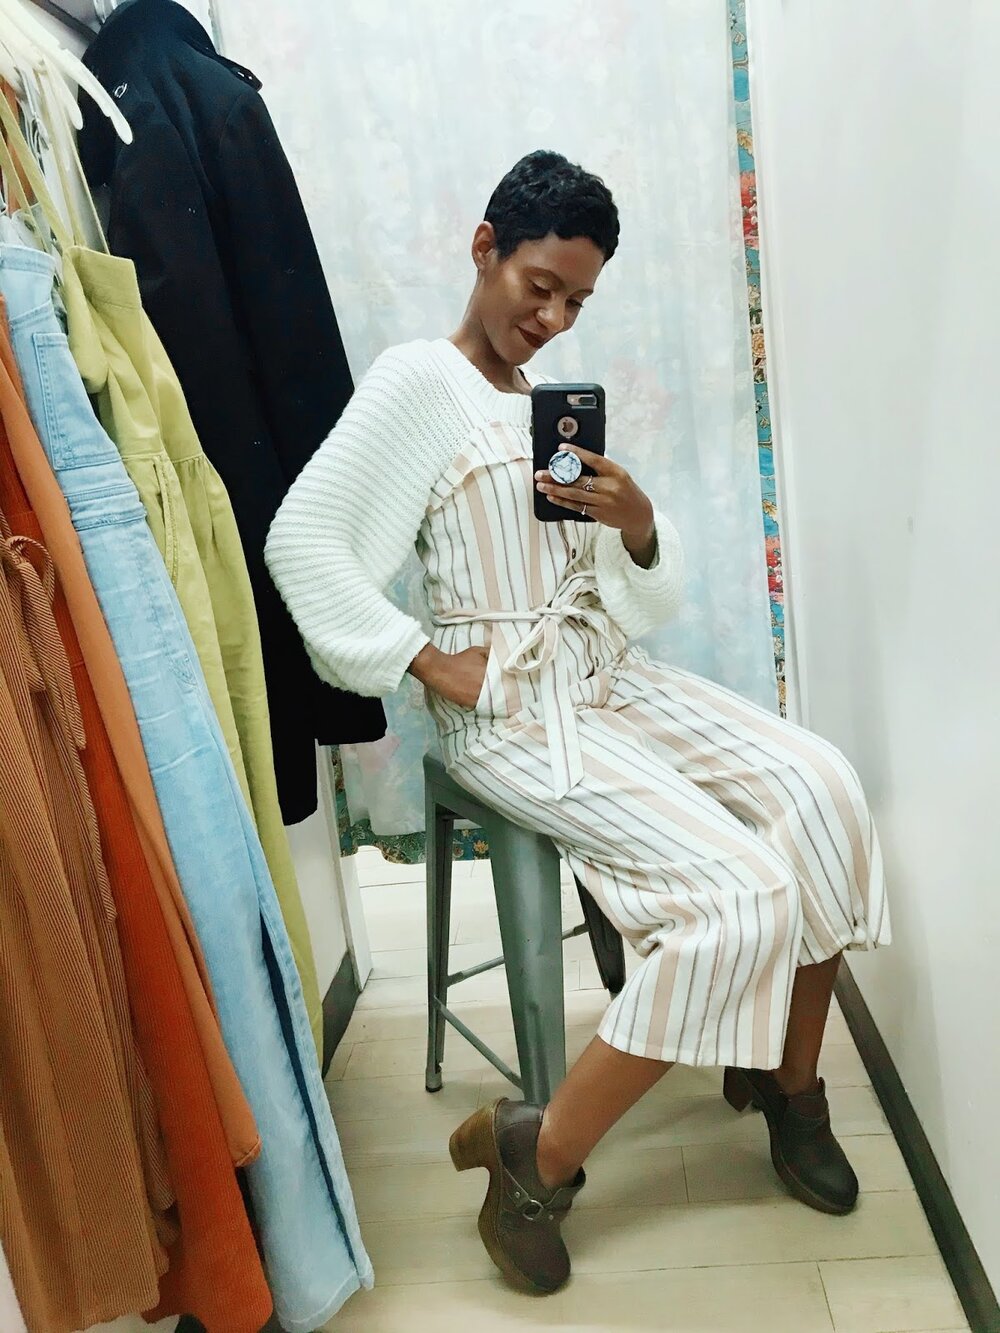 A Cute Try On Haul Of All Of The Jumpsuits I Want To Buy!